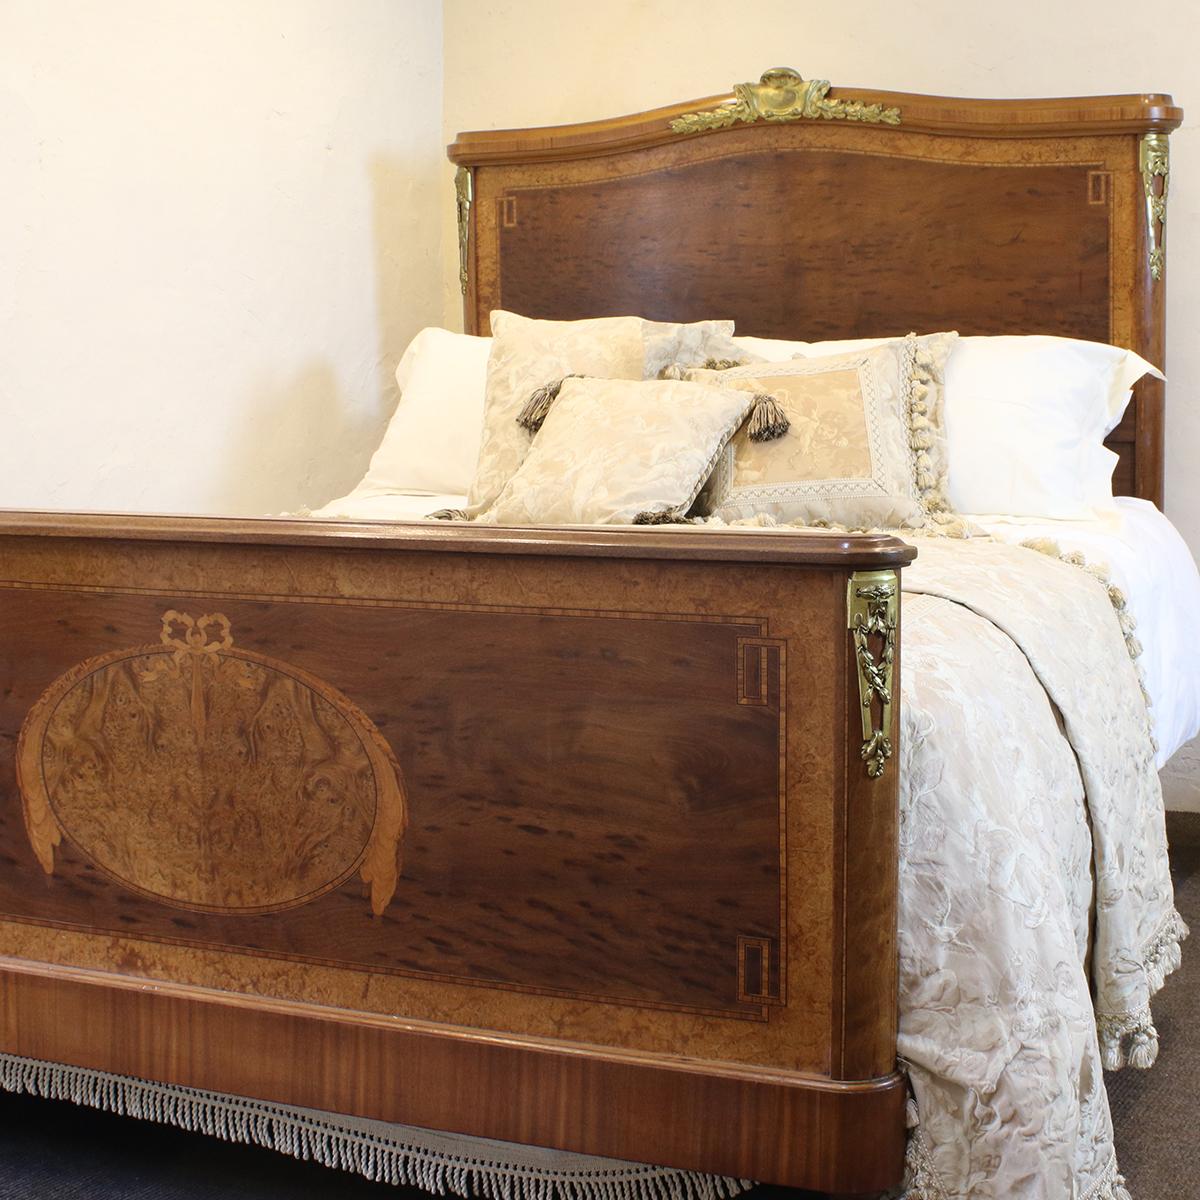 A fine mahogany bed from the early 20th century with burr walnut veneer and inlay work.

This bed accepts a British King Size or American Queen Size base and mattress set (5ft wide, 60in or 150cm)

The price is for the bed frame alone. The base,